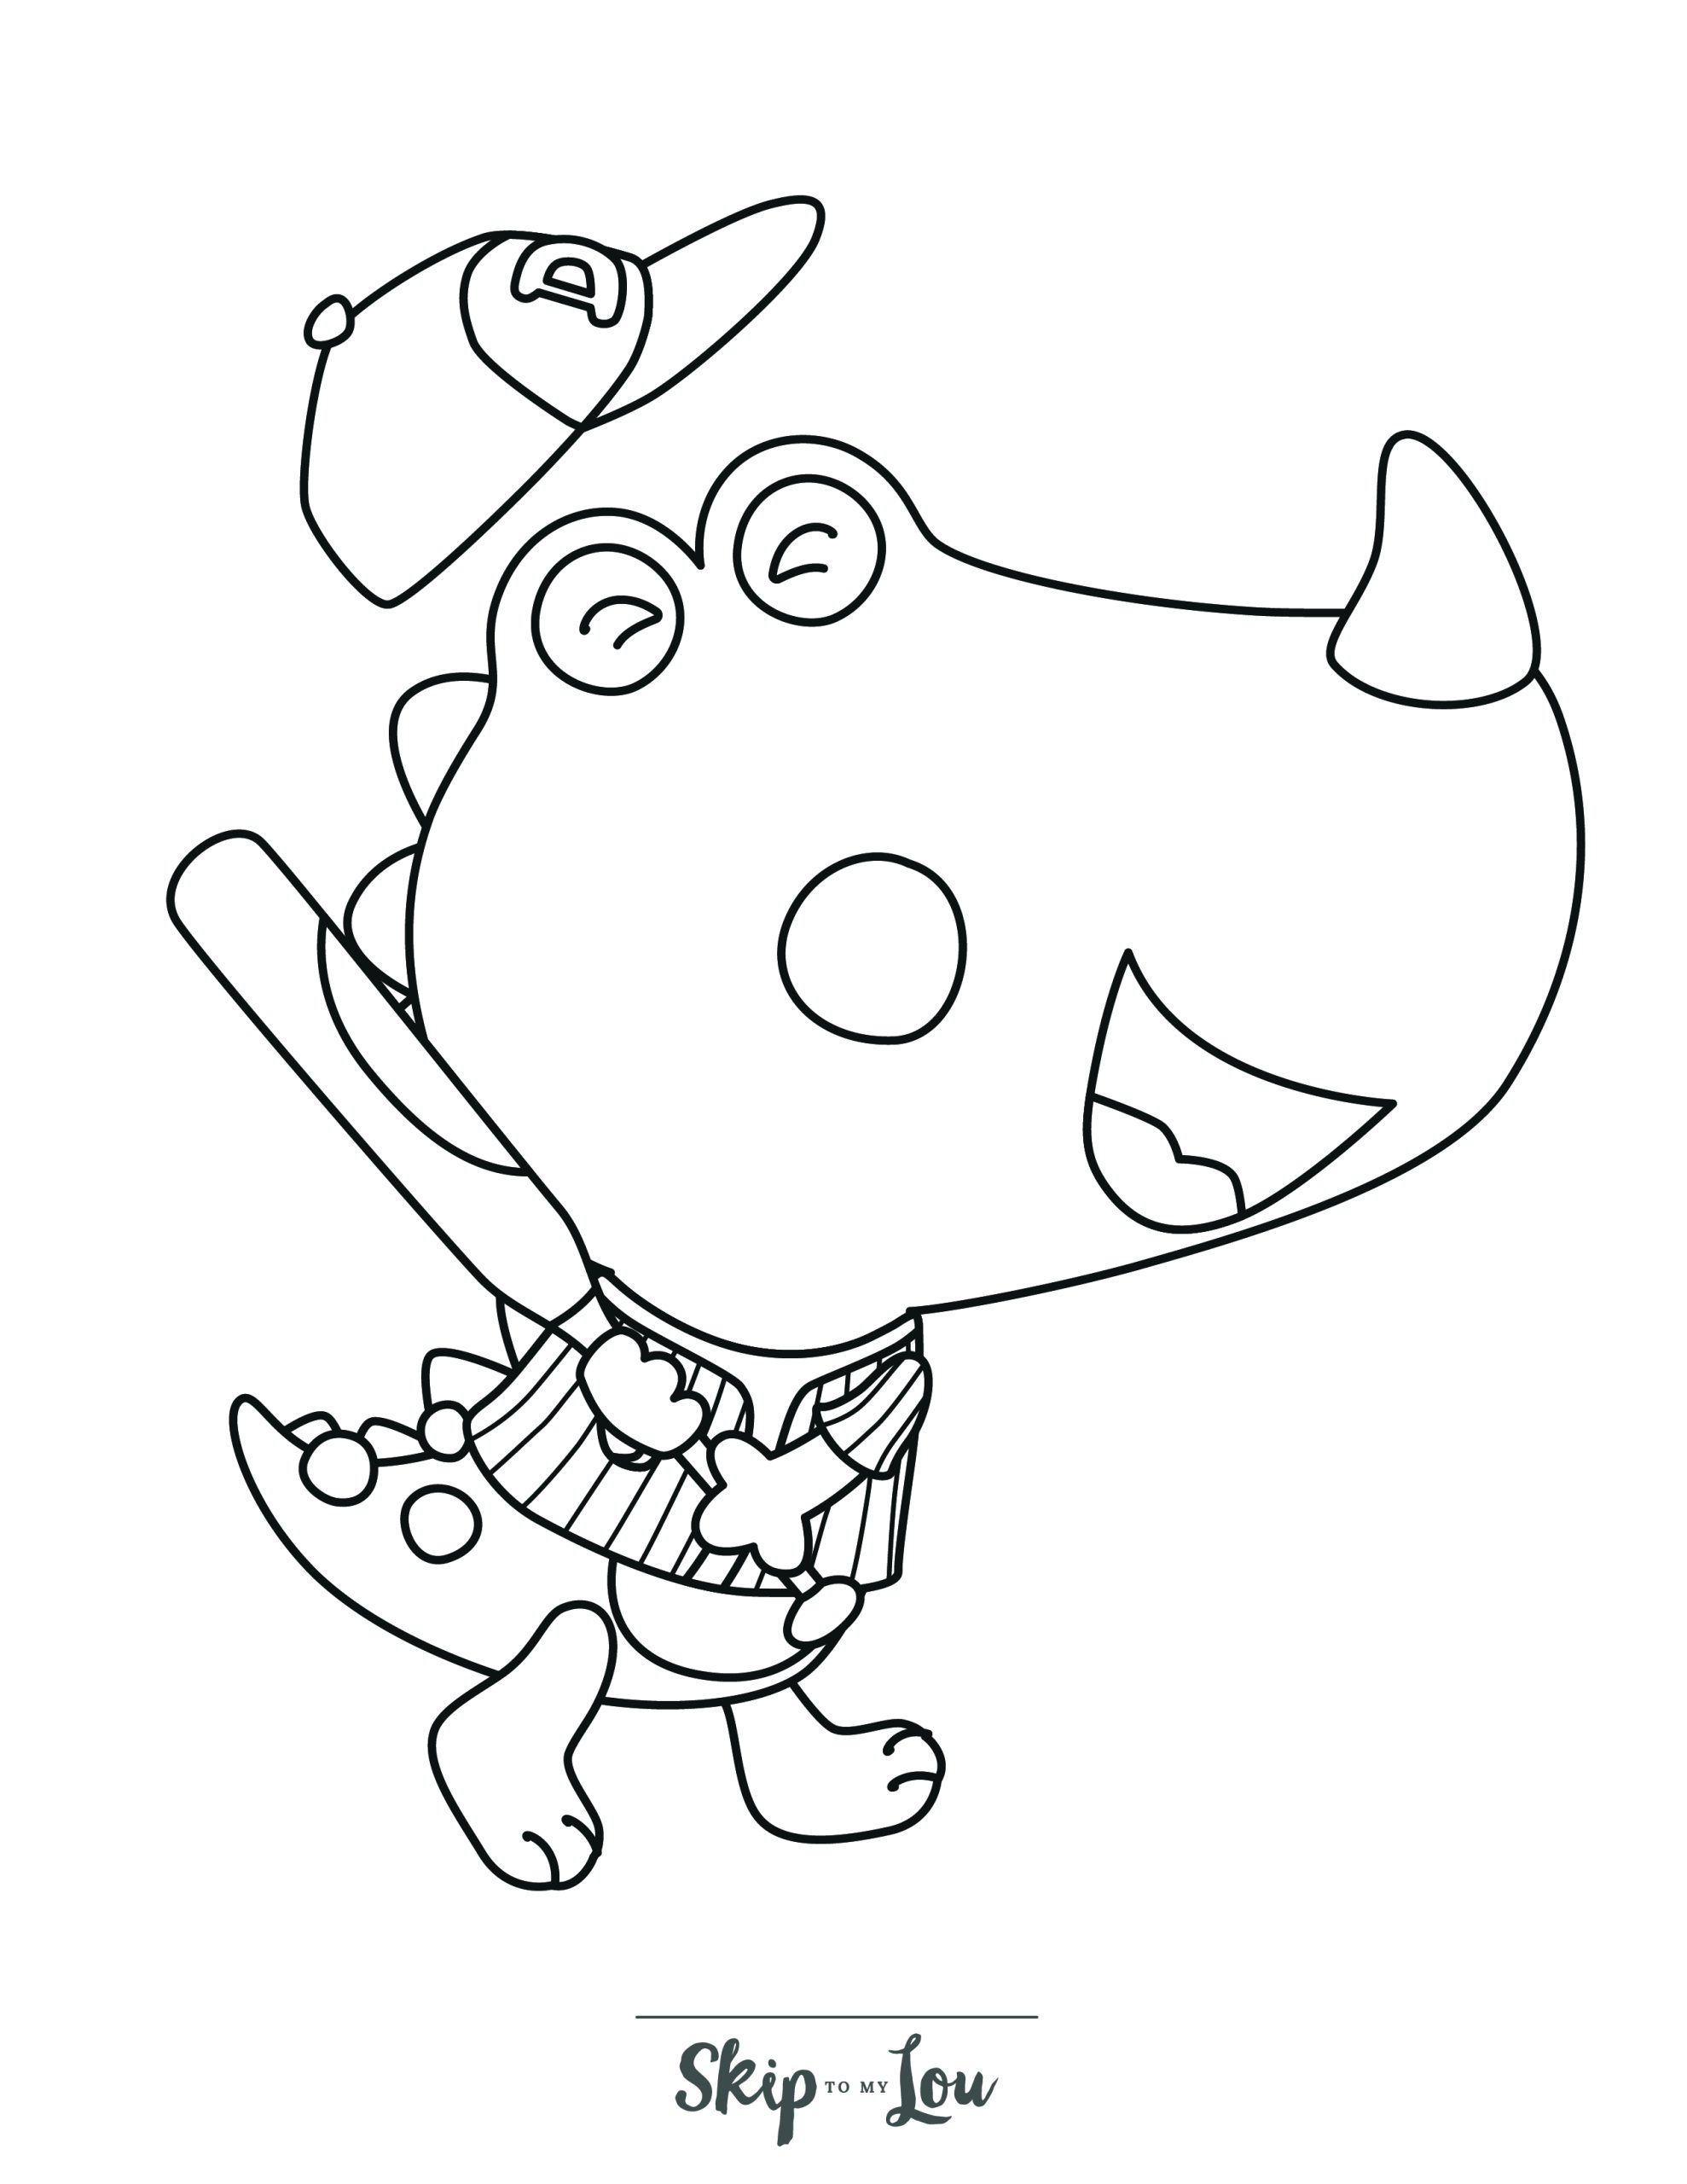 Baseball Coloring Page 7 - A line drawing of a dinosaur baseball player with a bat and a large head.